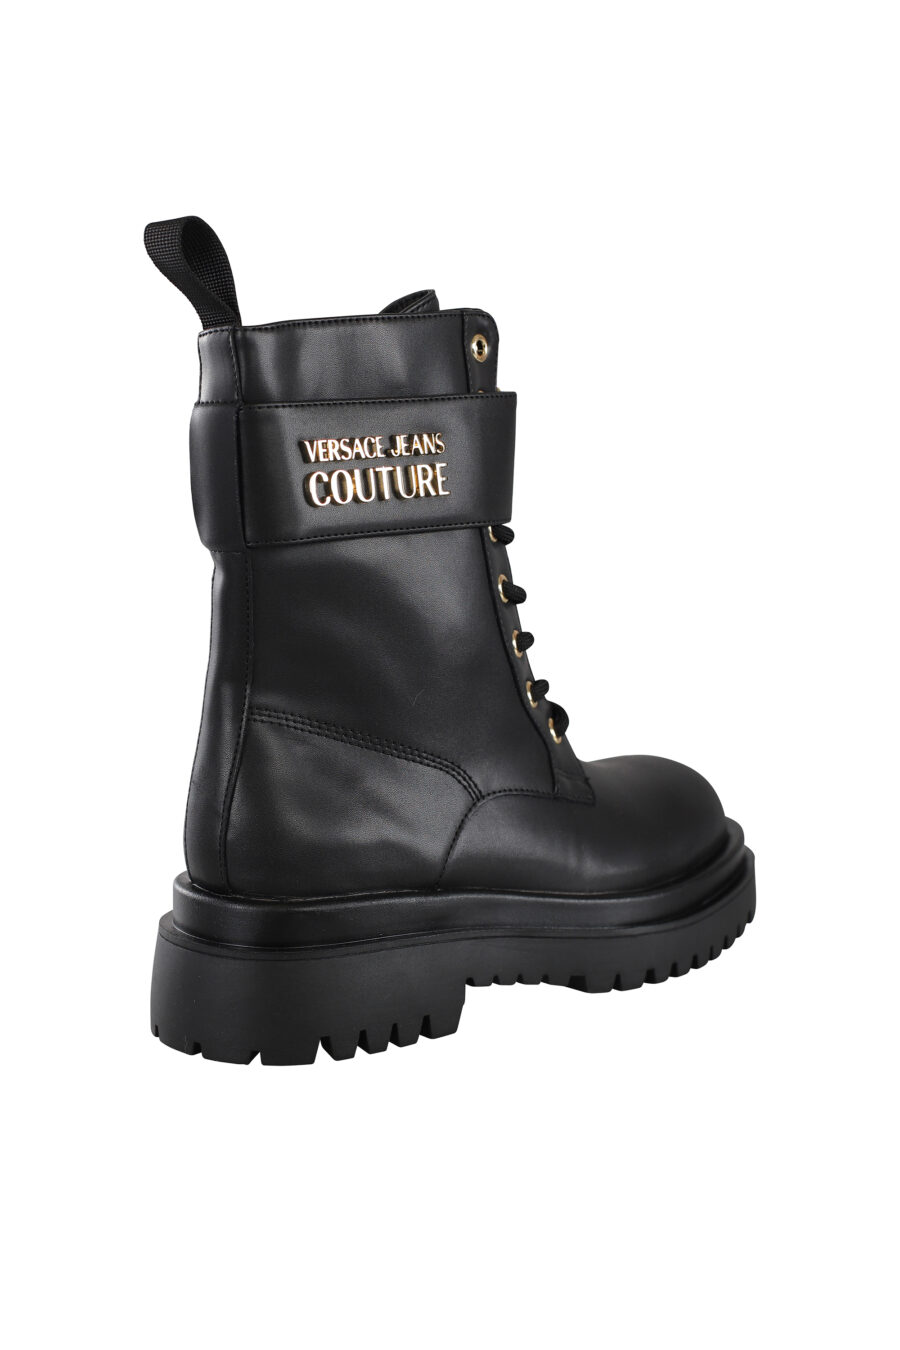 Black lace-up ankle boots with gold lettering logo - IMG 6876